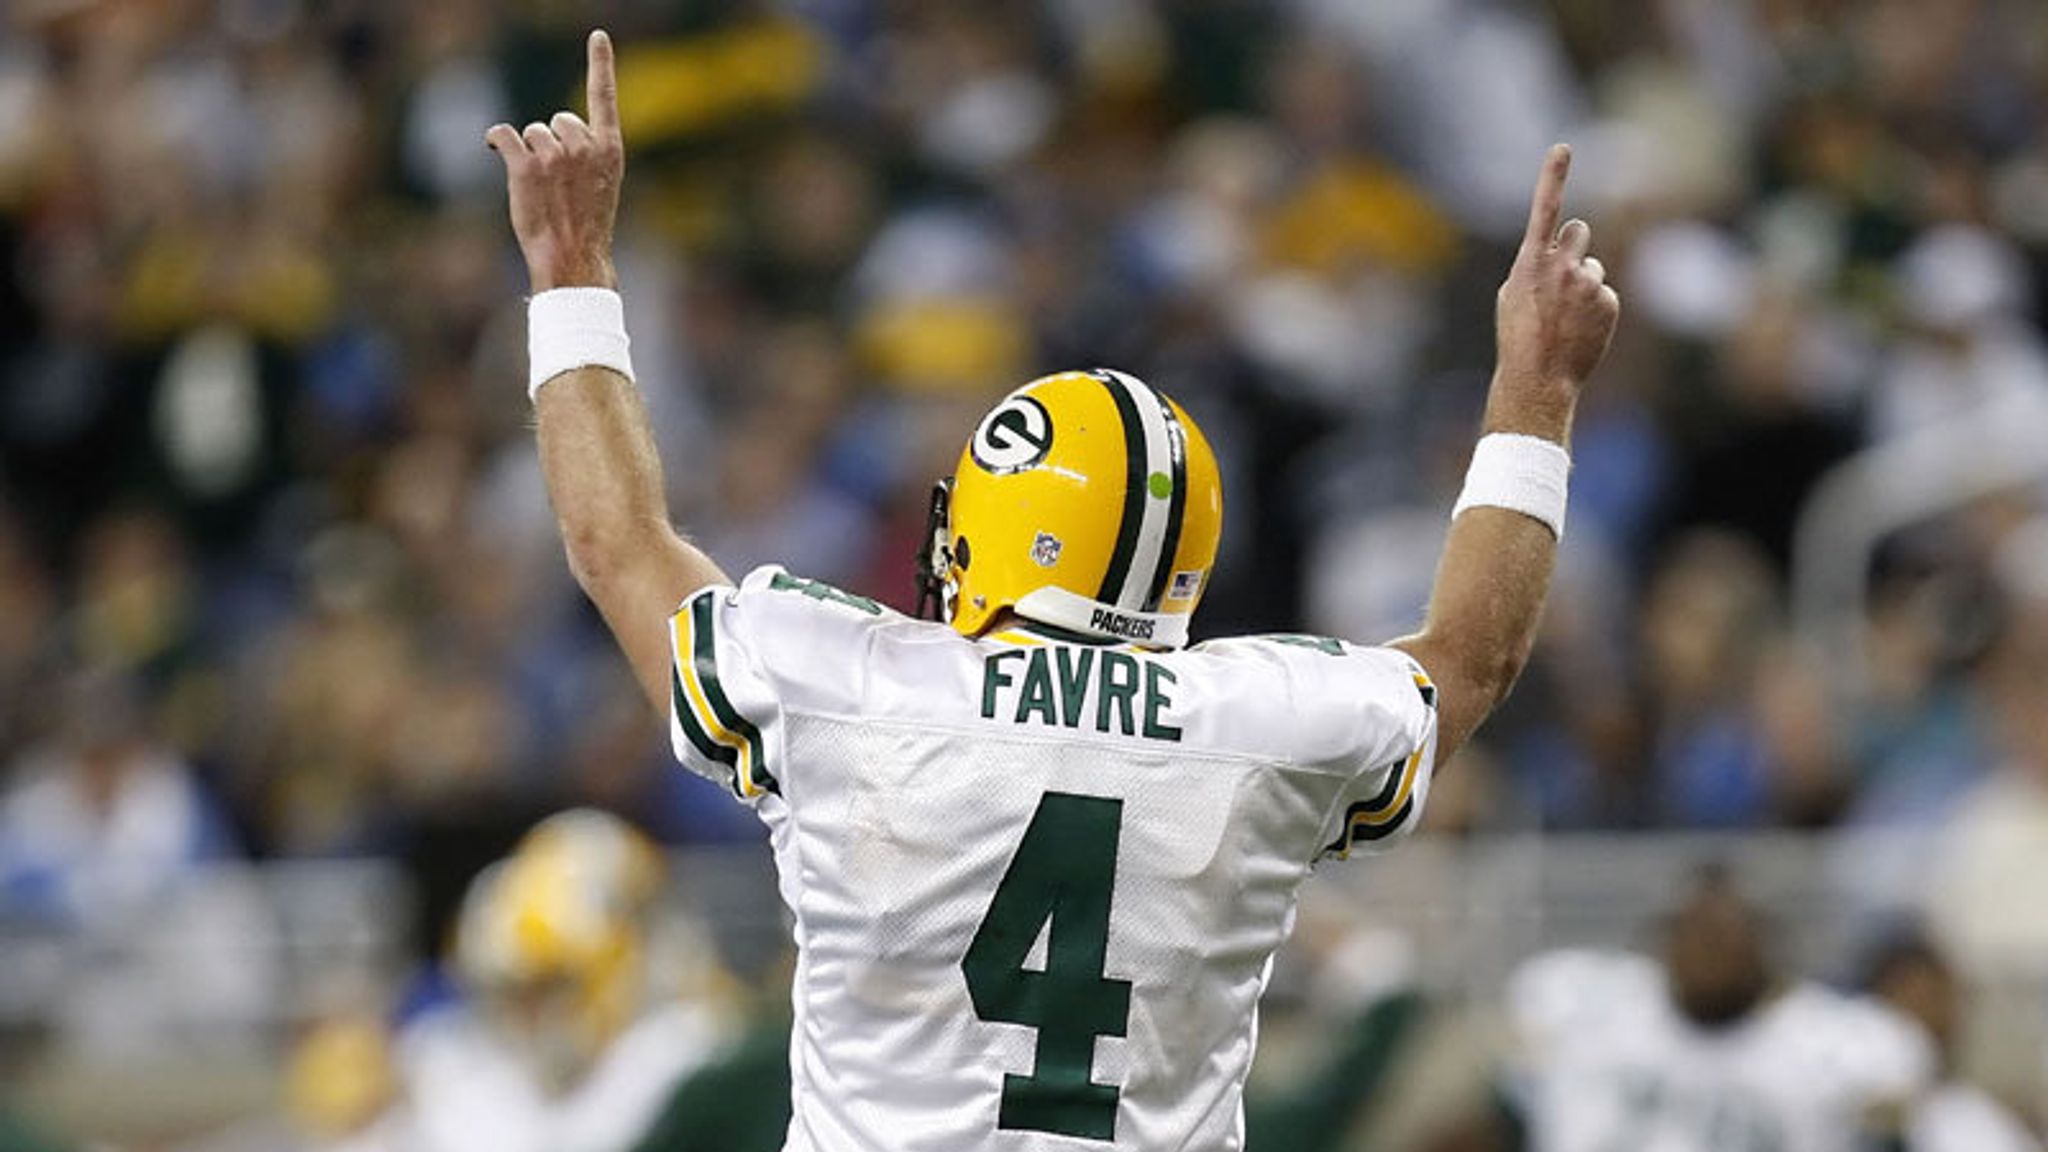 Favre in record-breaking form, NFL News